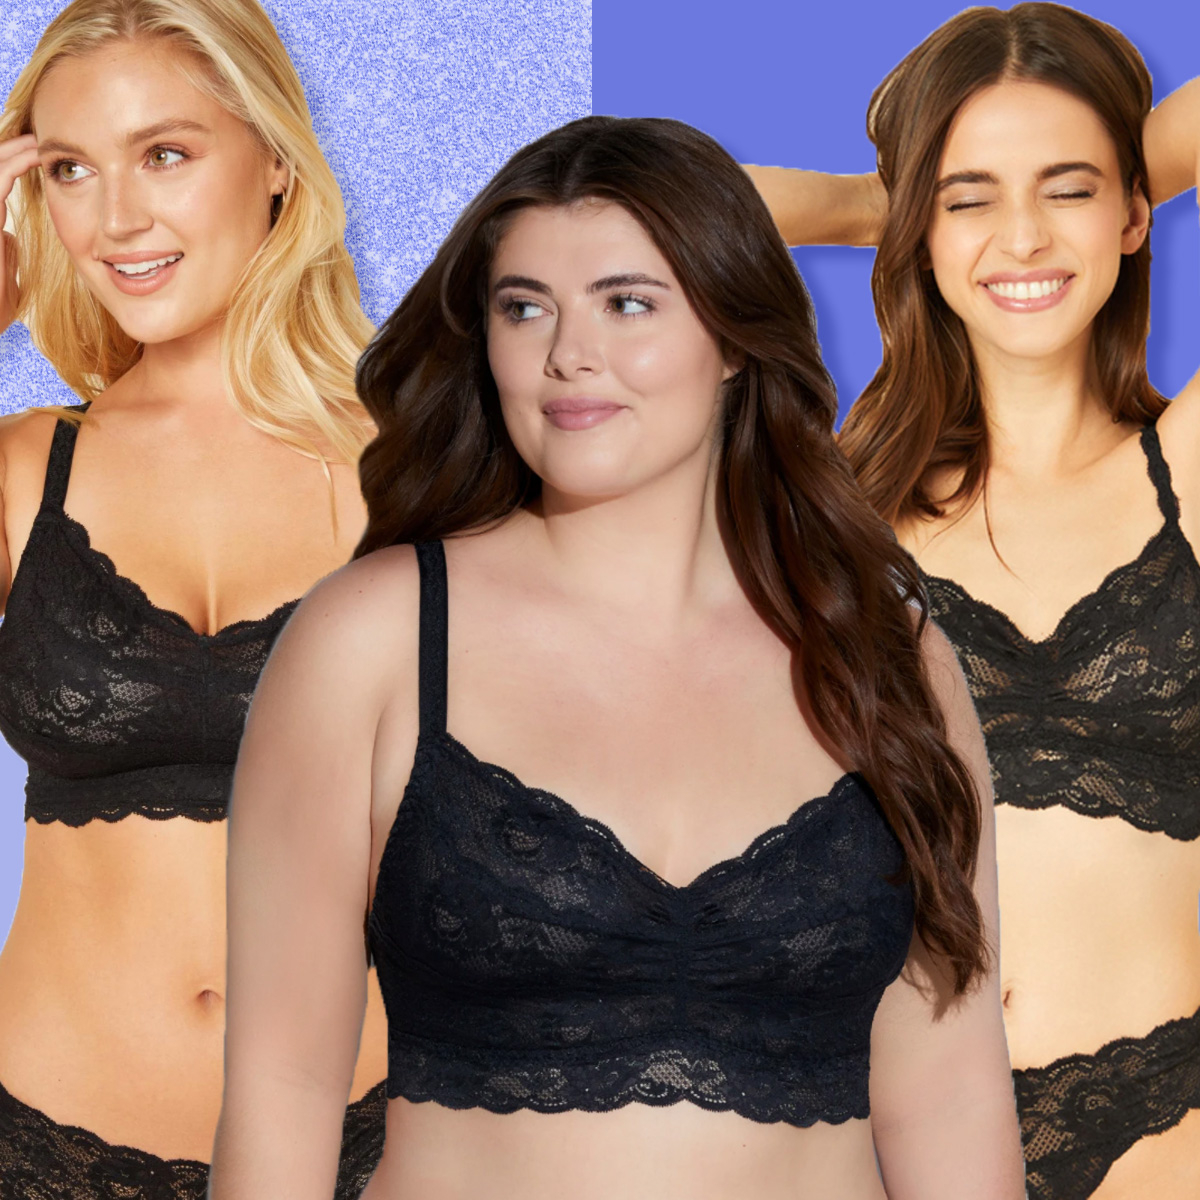 Cosabella Never Say Never Side Support Bra in Black - Busted Bra Shop